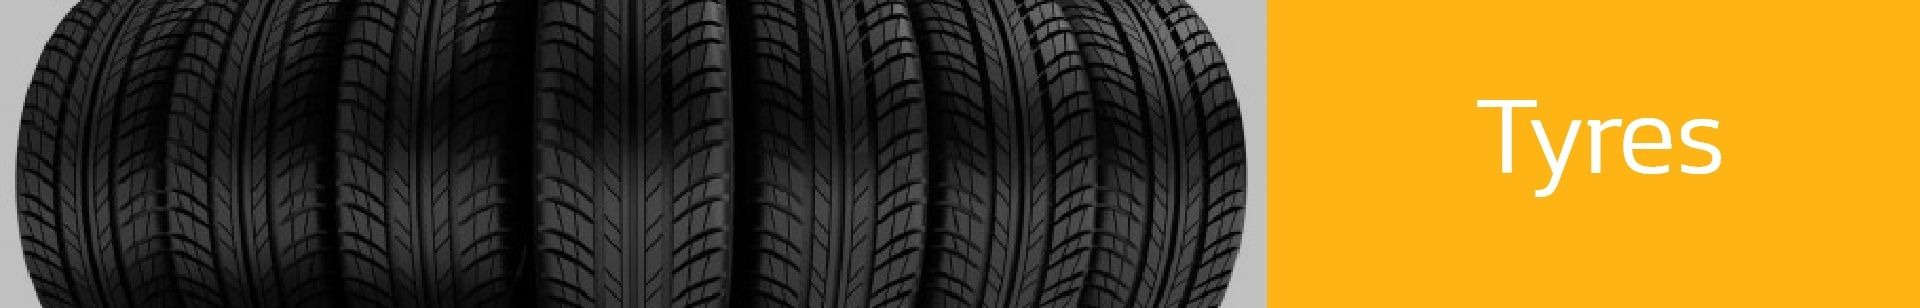 Tyres at Devco M.V.S